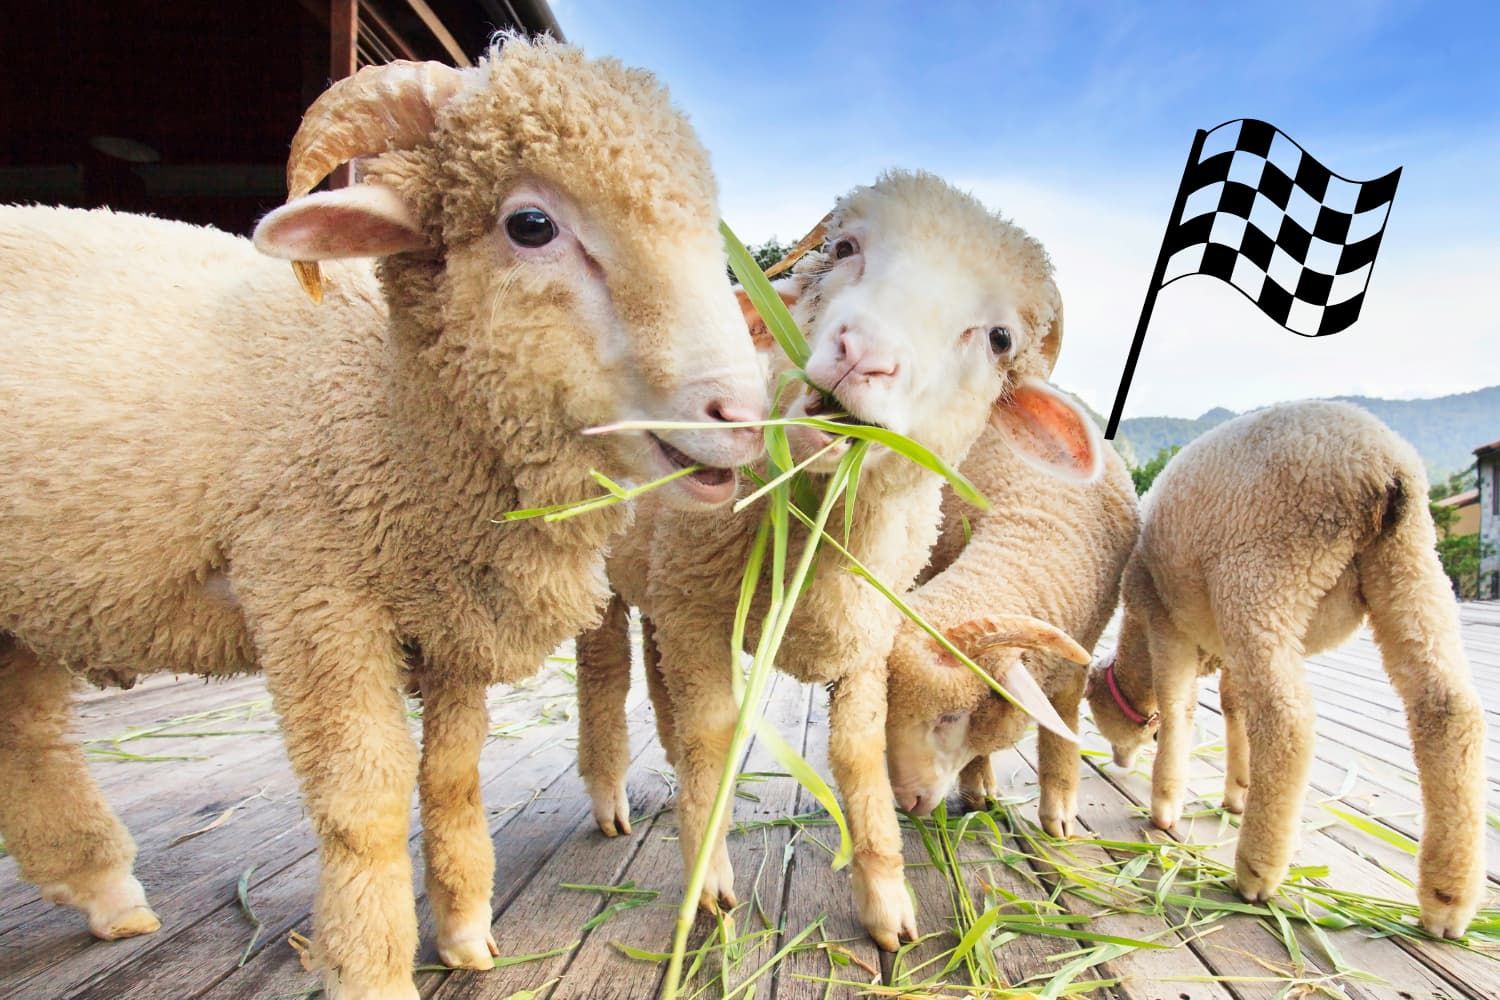 Game%20-%20OT%20Psalm%2023%20-%20The%20feed%20the%20sheep%20relay%20race-6bb58723 Psalms